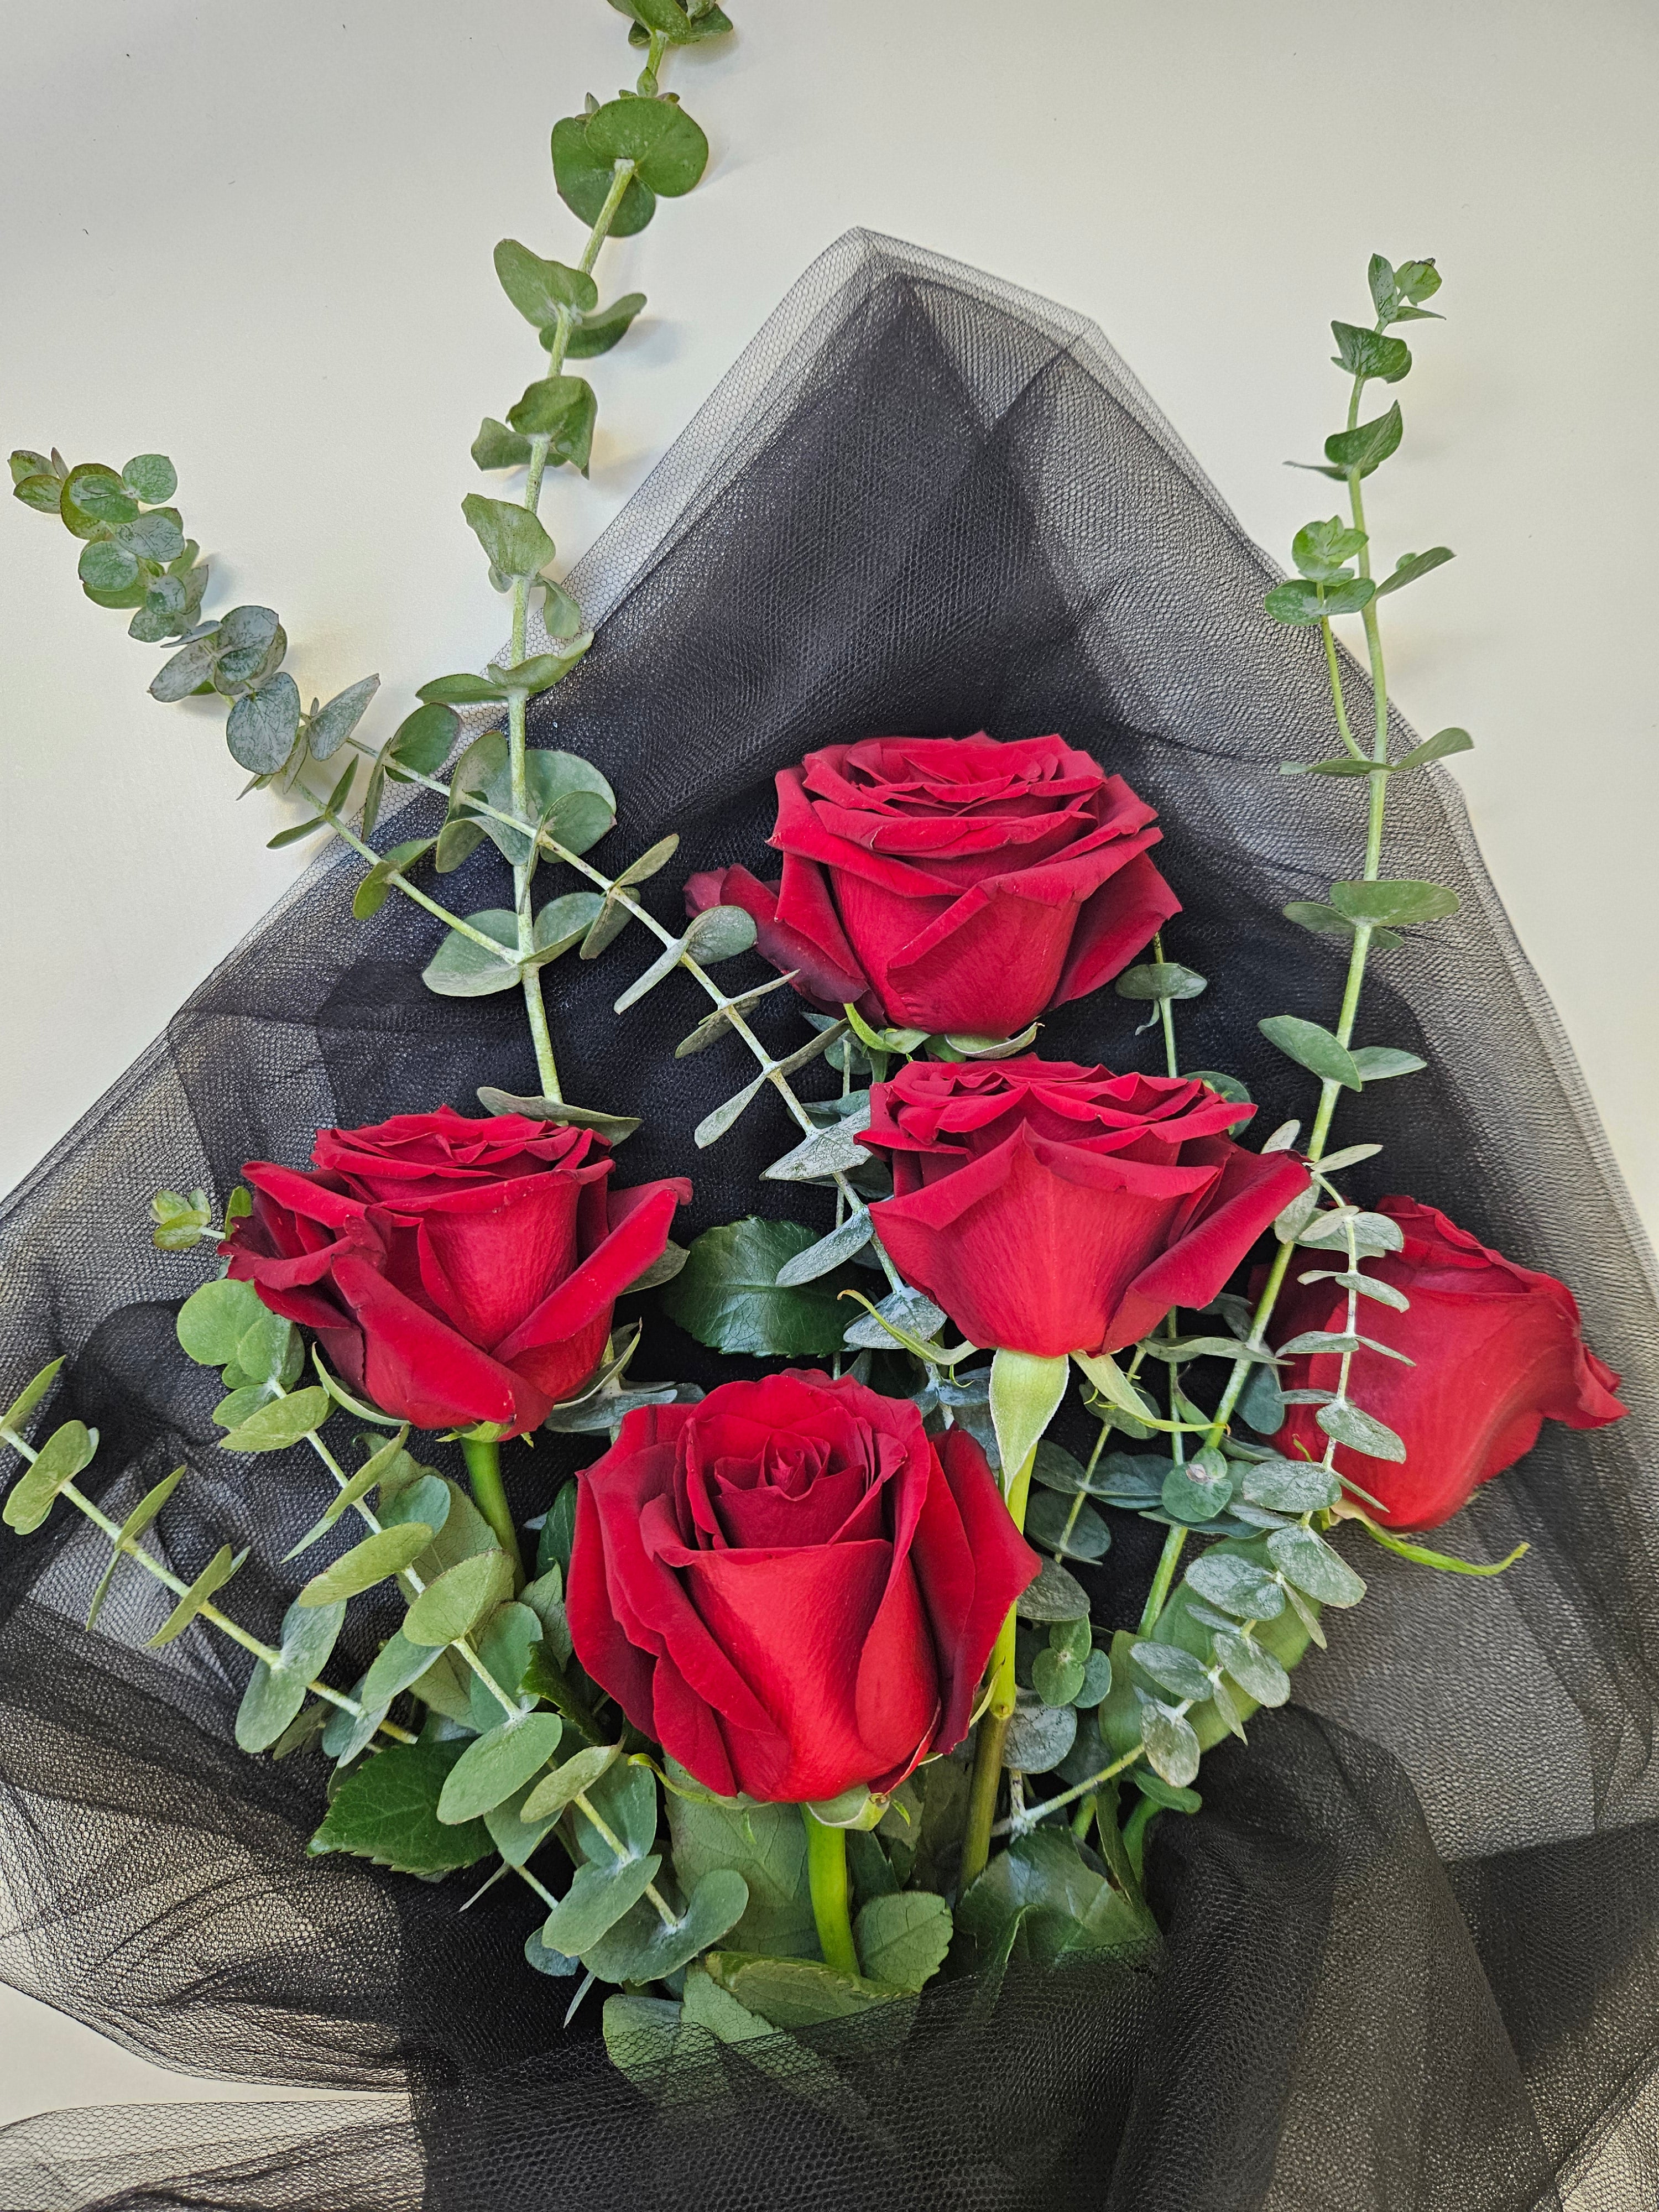 Five long-stemmed roses with foliage wrapped in black.